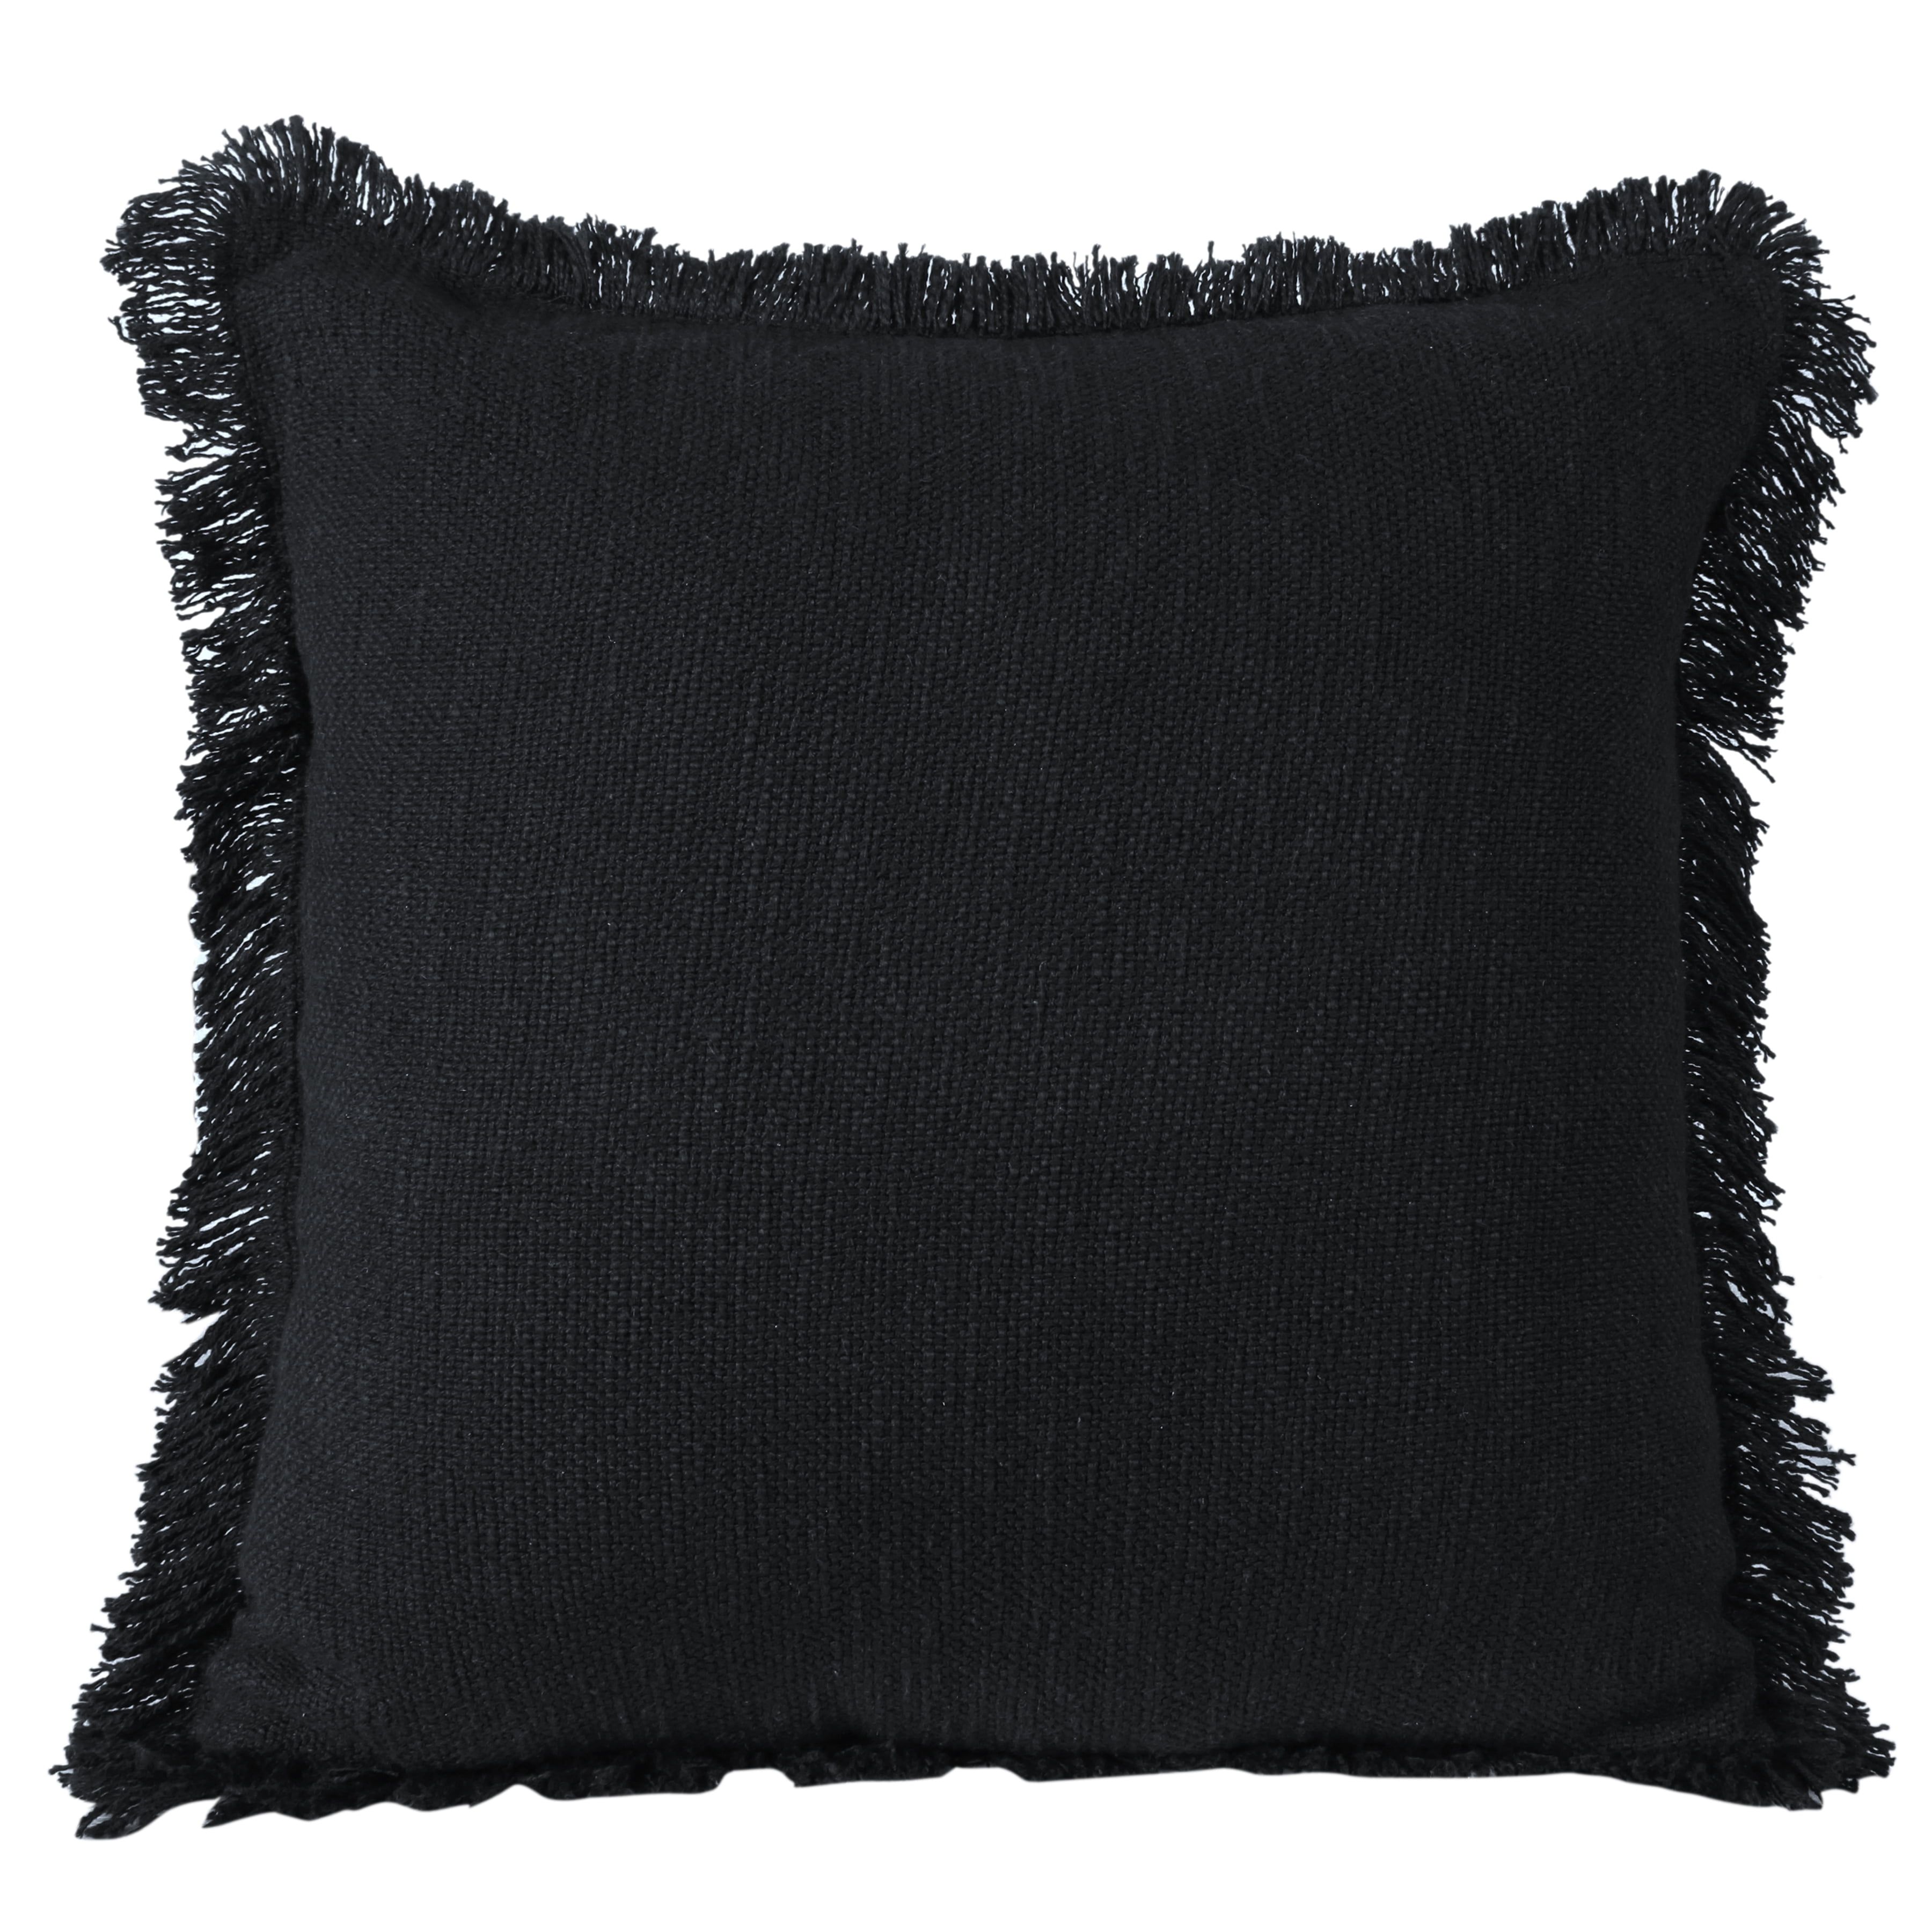 Coastal Chic 20" Square Black Cotton Textured Throw Pillow with Fringe